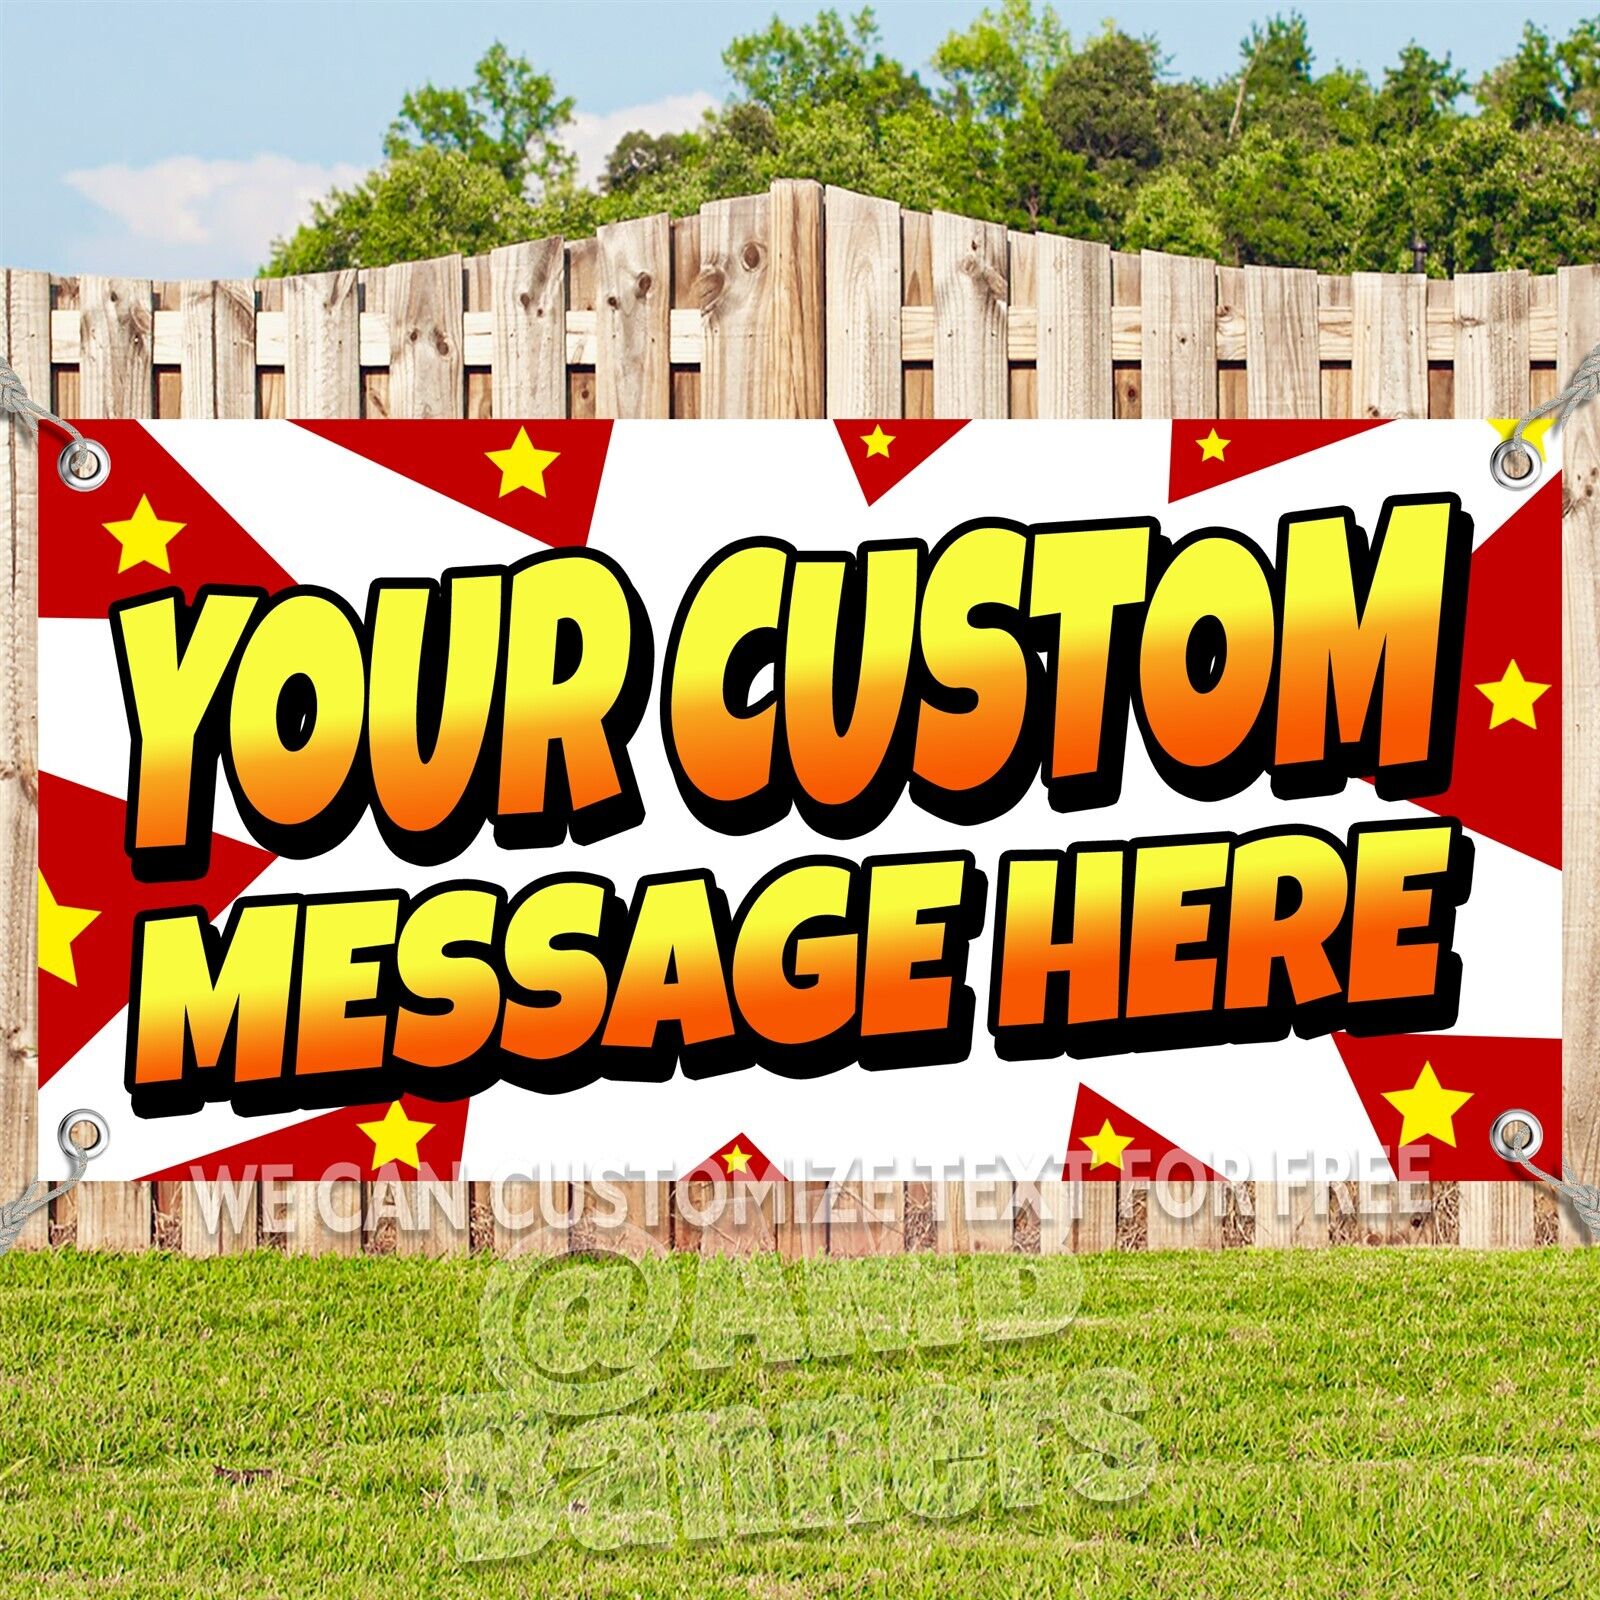 Custom-Made USA Vinyl Banners for Advertising Multiple Sizes and Great Designs